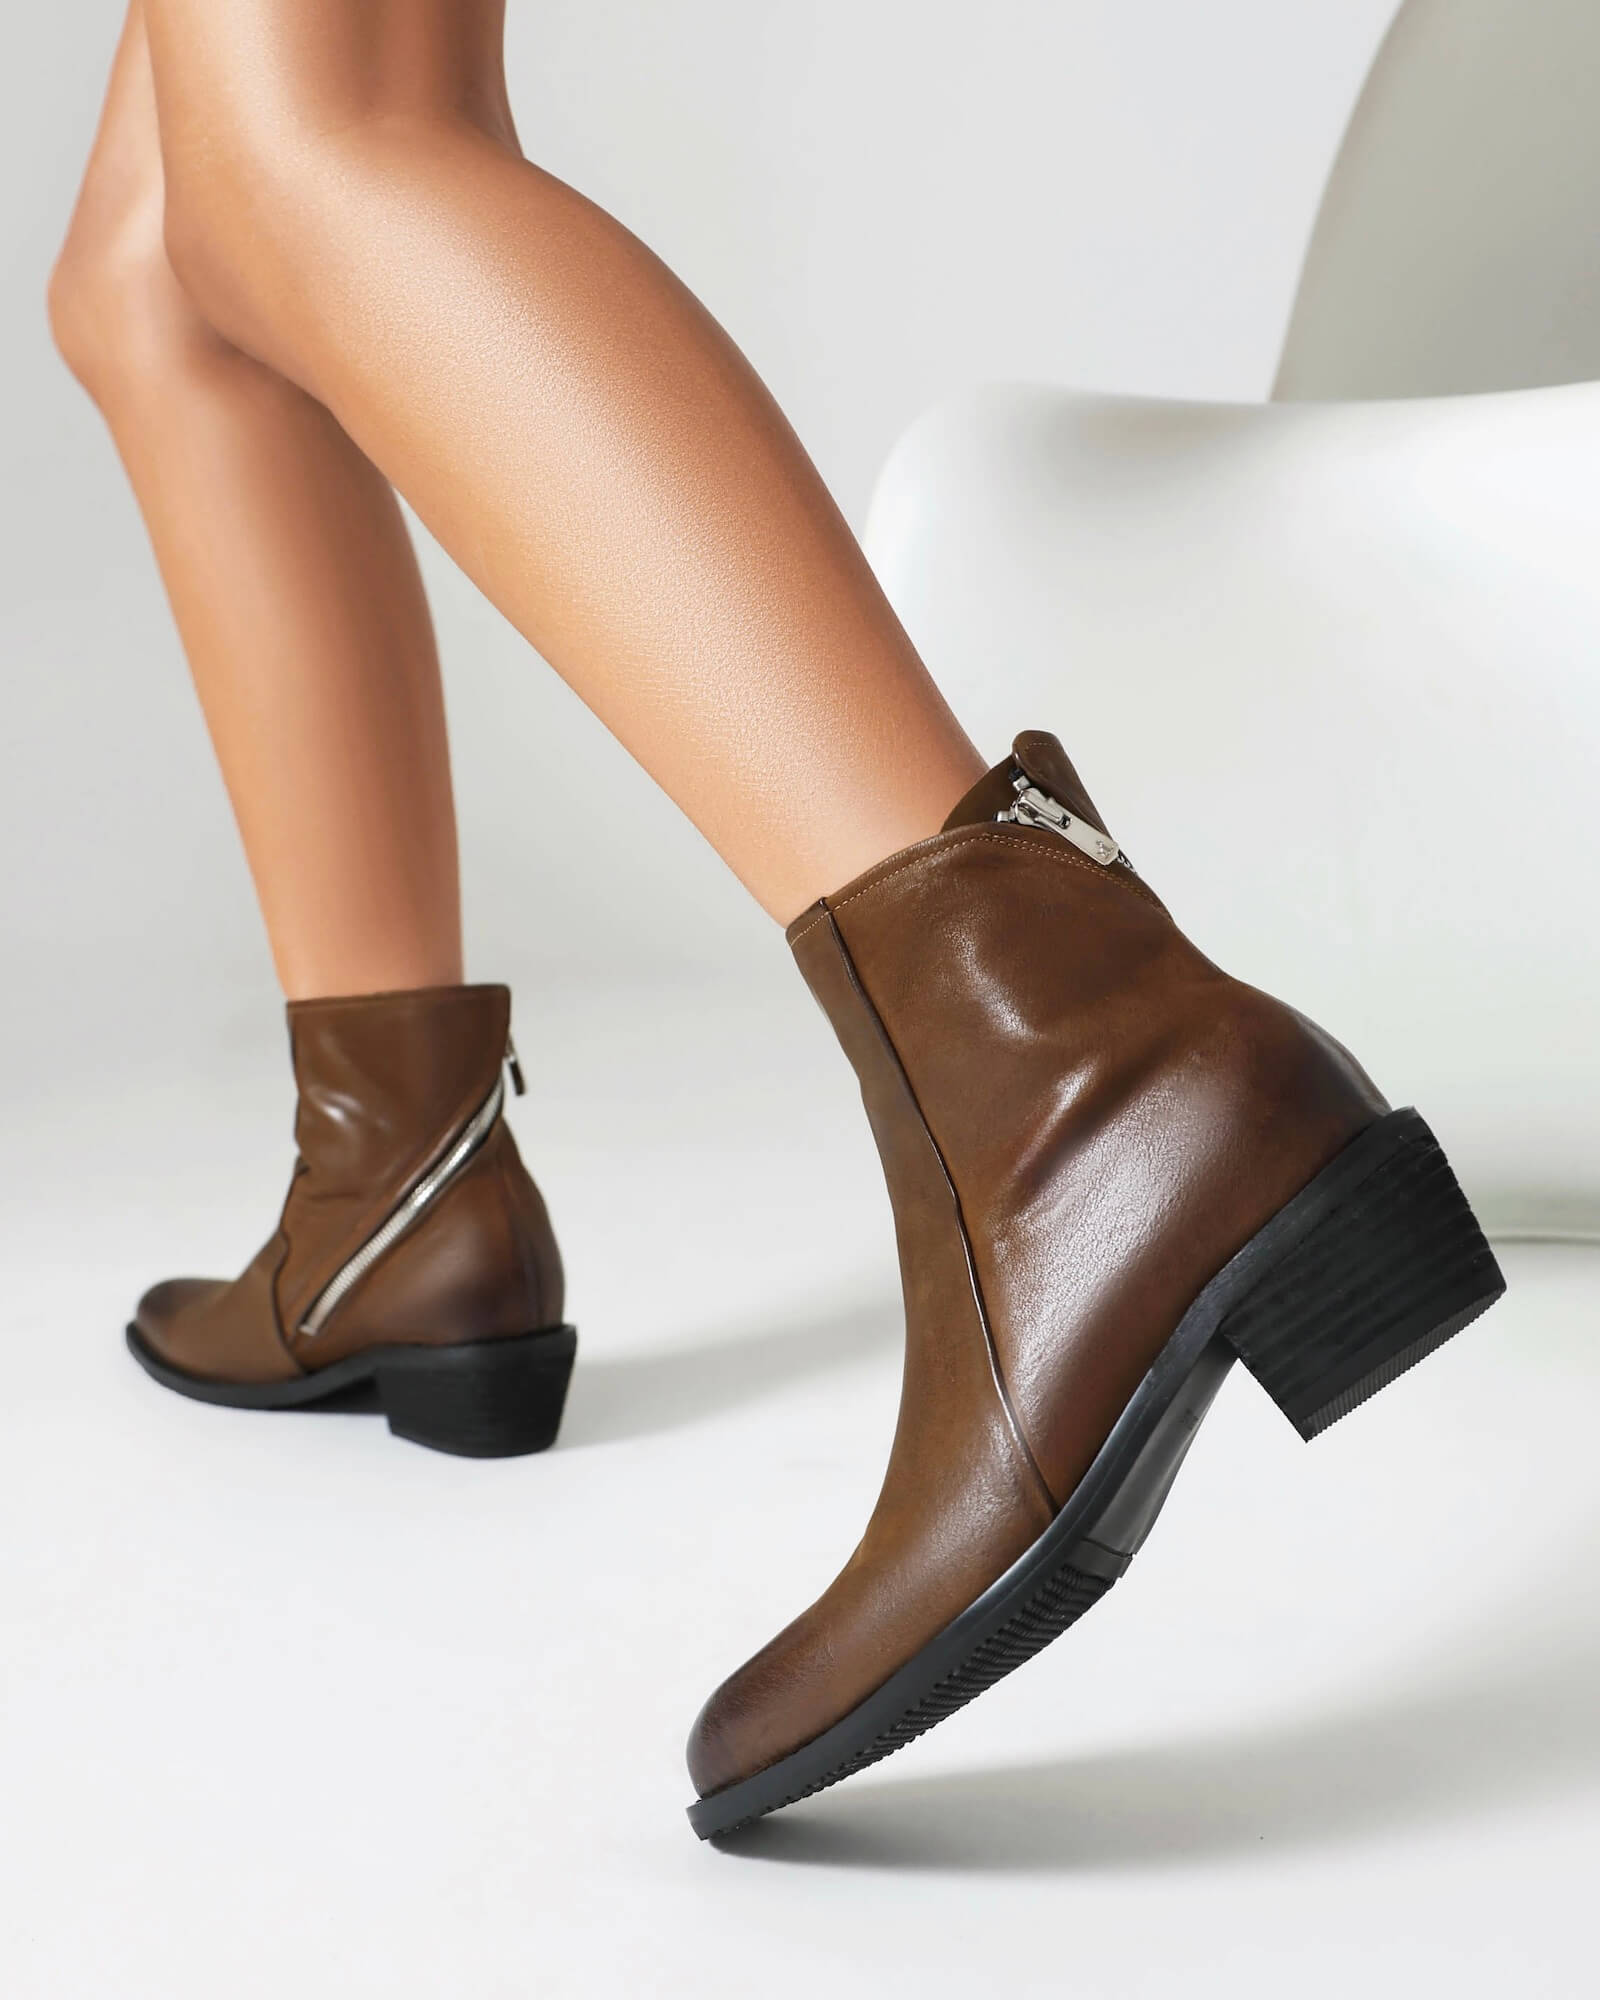 321-brown-leather-pointed-toe-boots-model-5